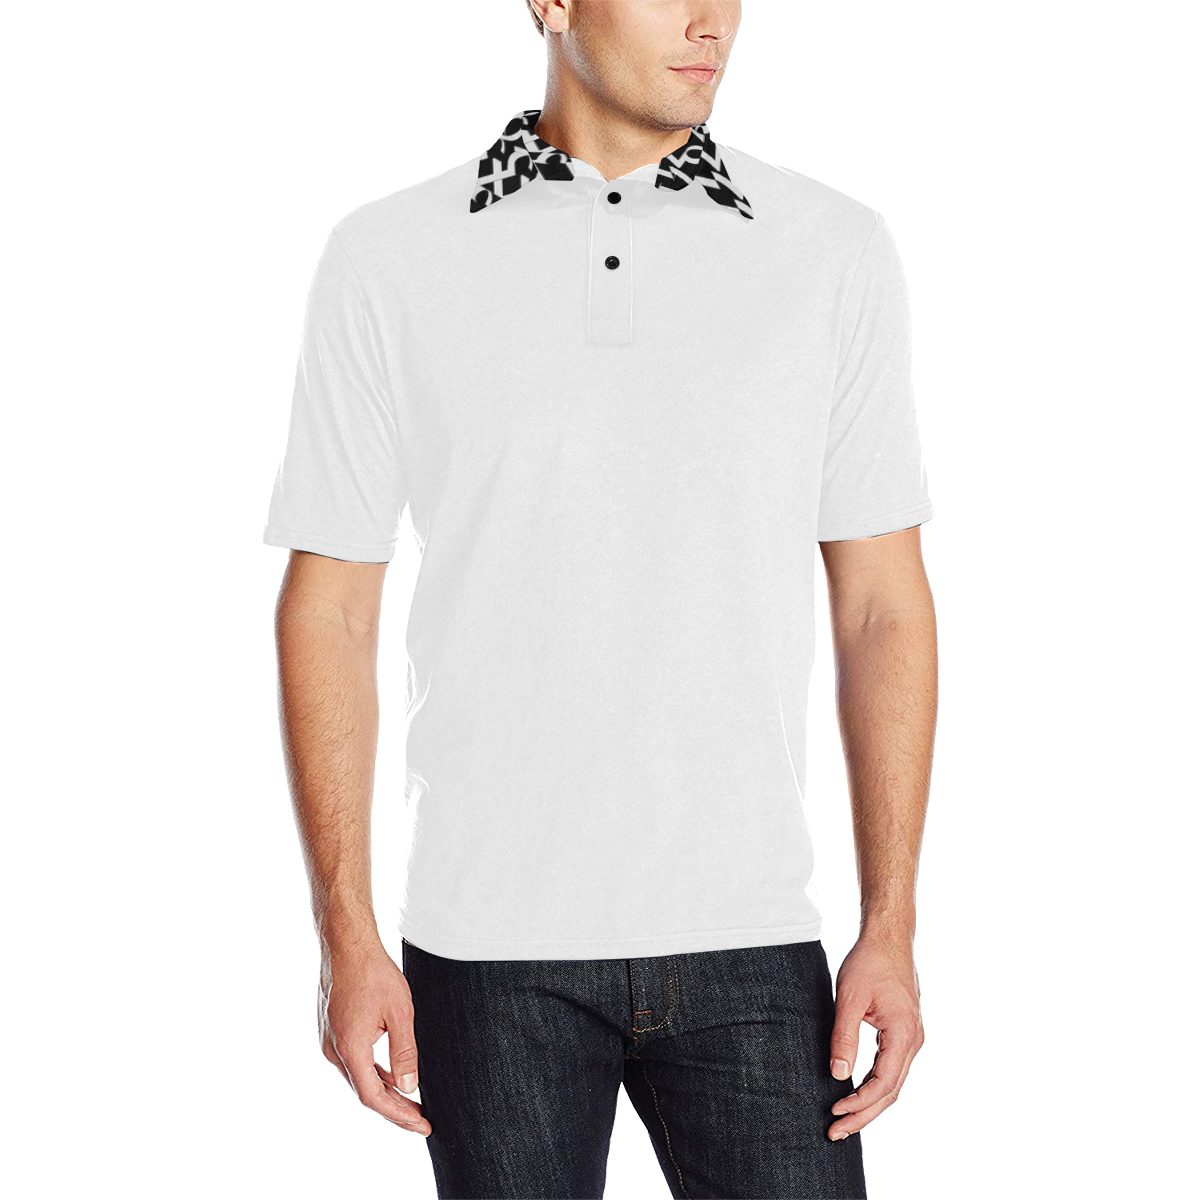 NUMBERS Collection 1234567 Collar White/Black Men's All Over Print Polo Shirt (Model T55)